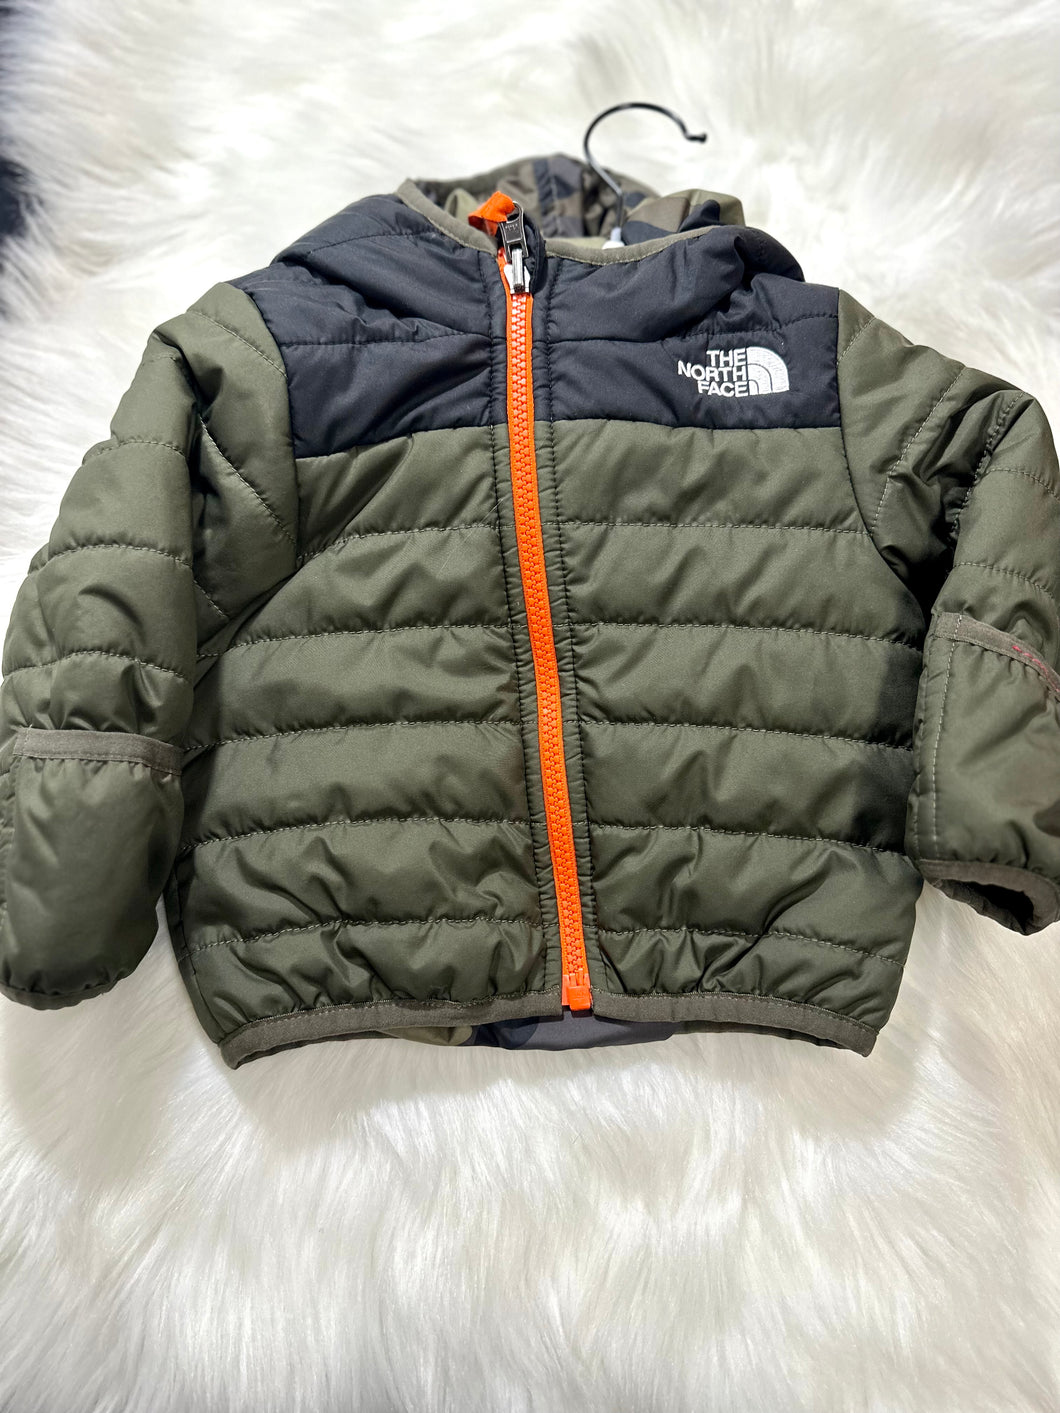 The North Face Reversible Jacket 6-12m